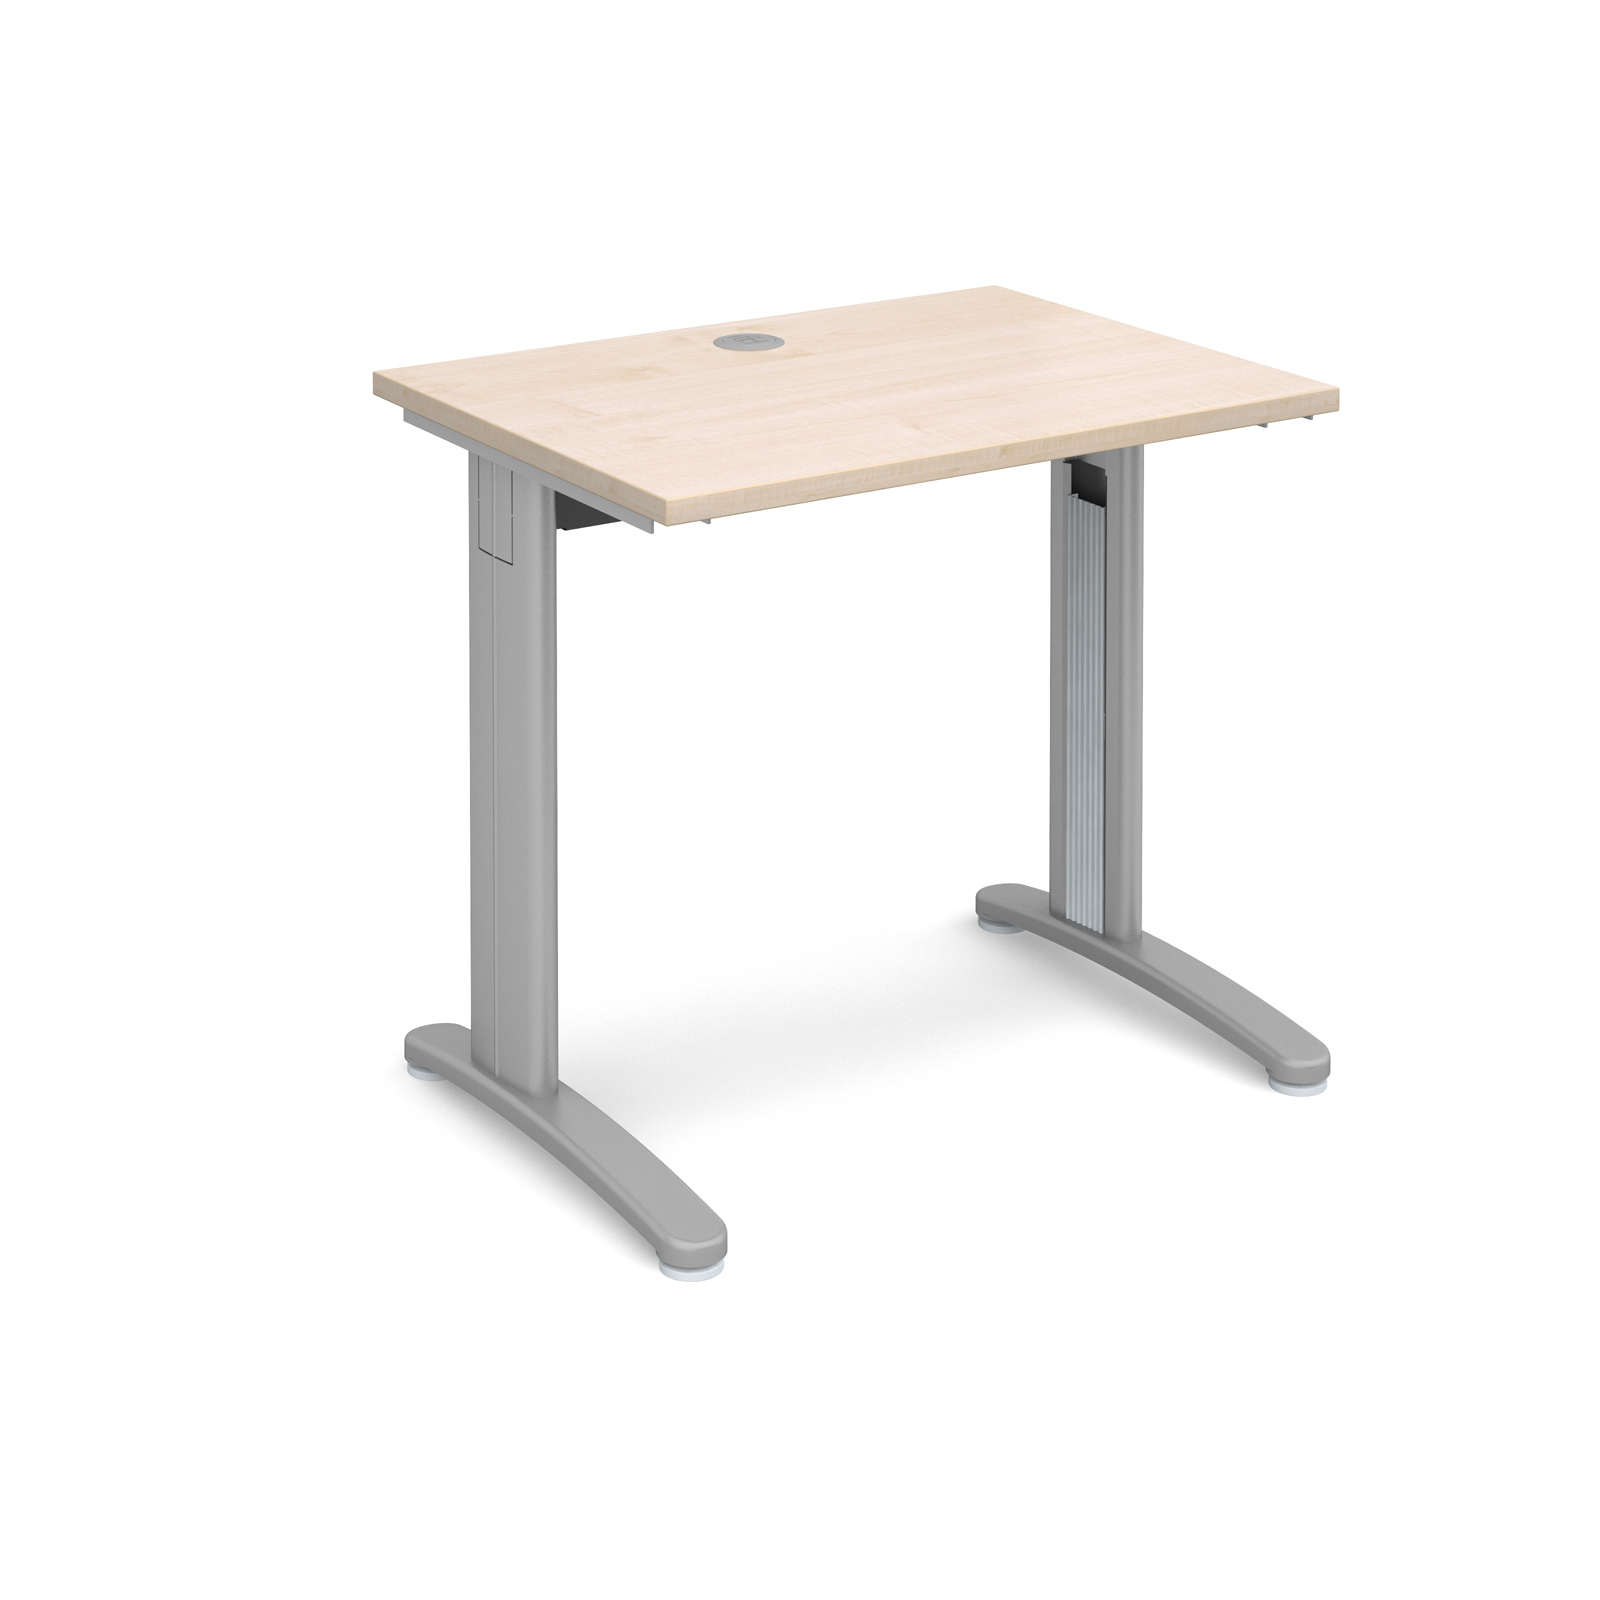 TR10 straight desk 800mm x 600mm - silver frame, maple top